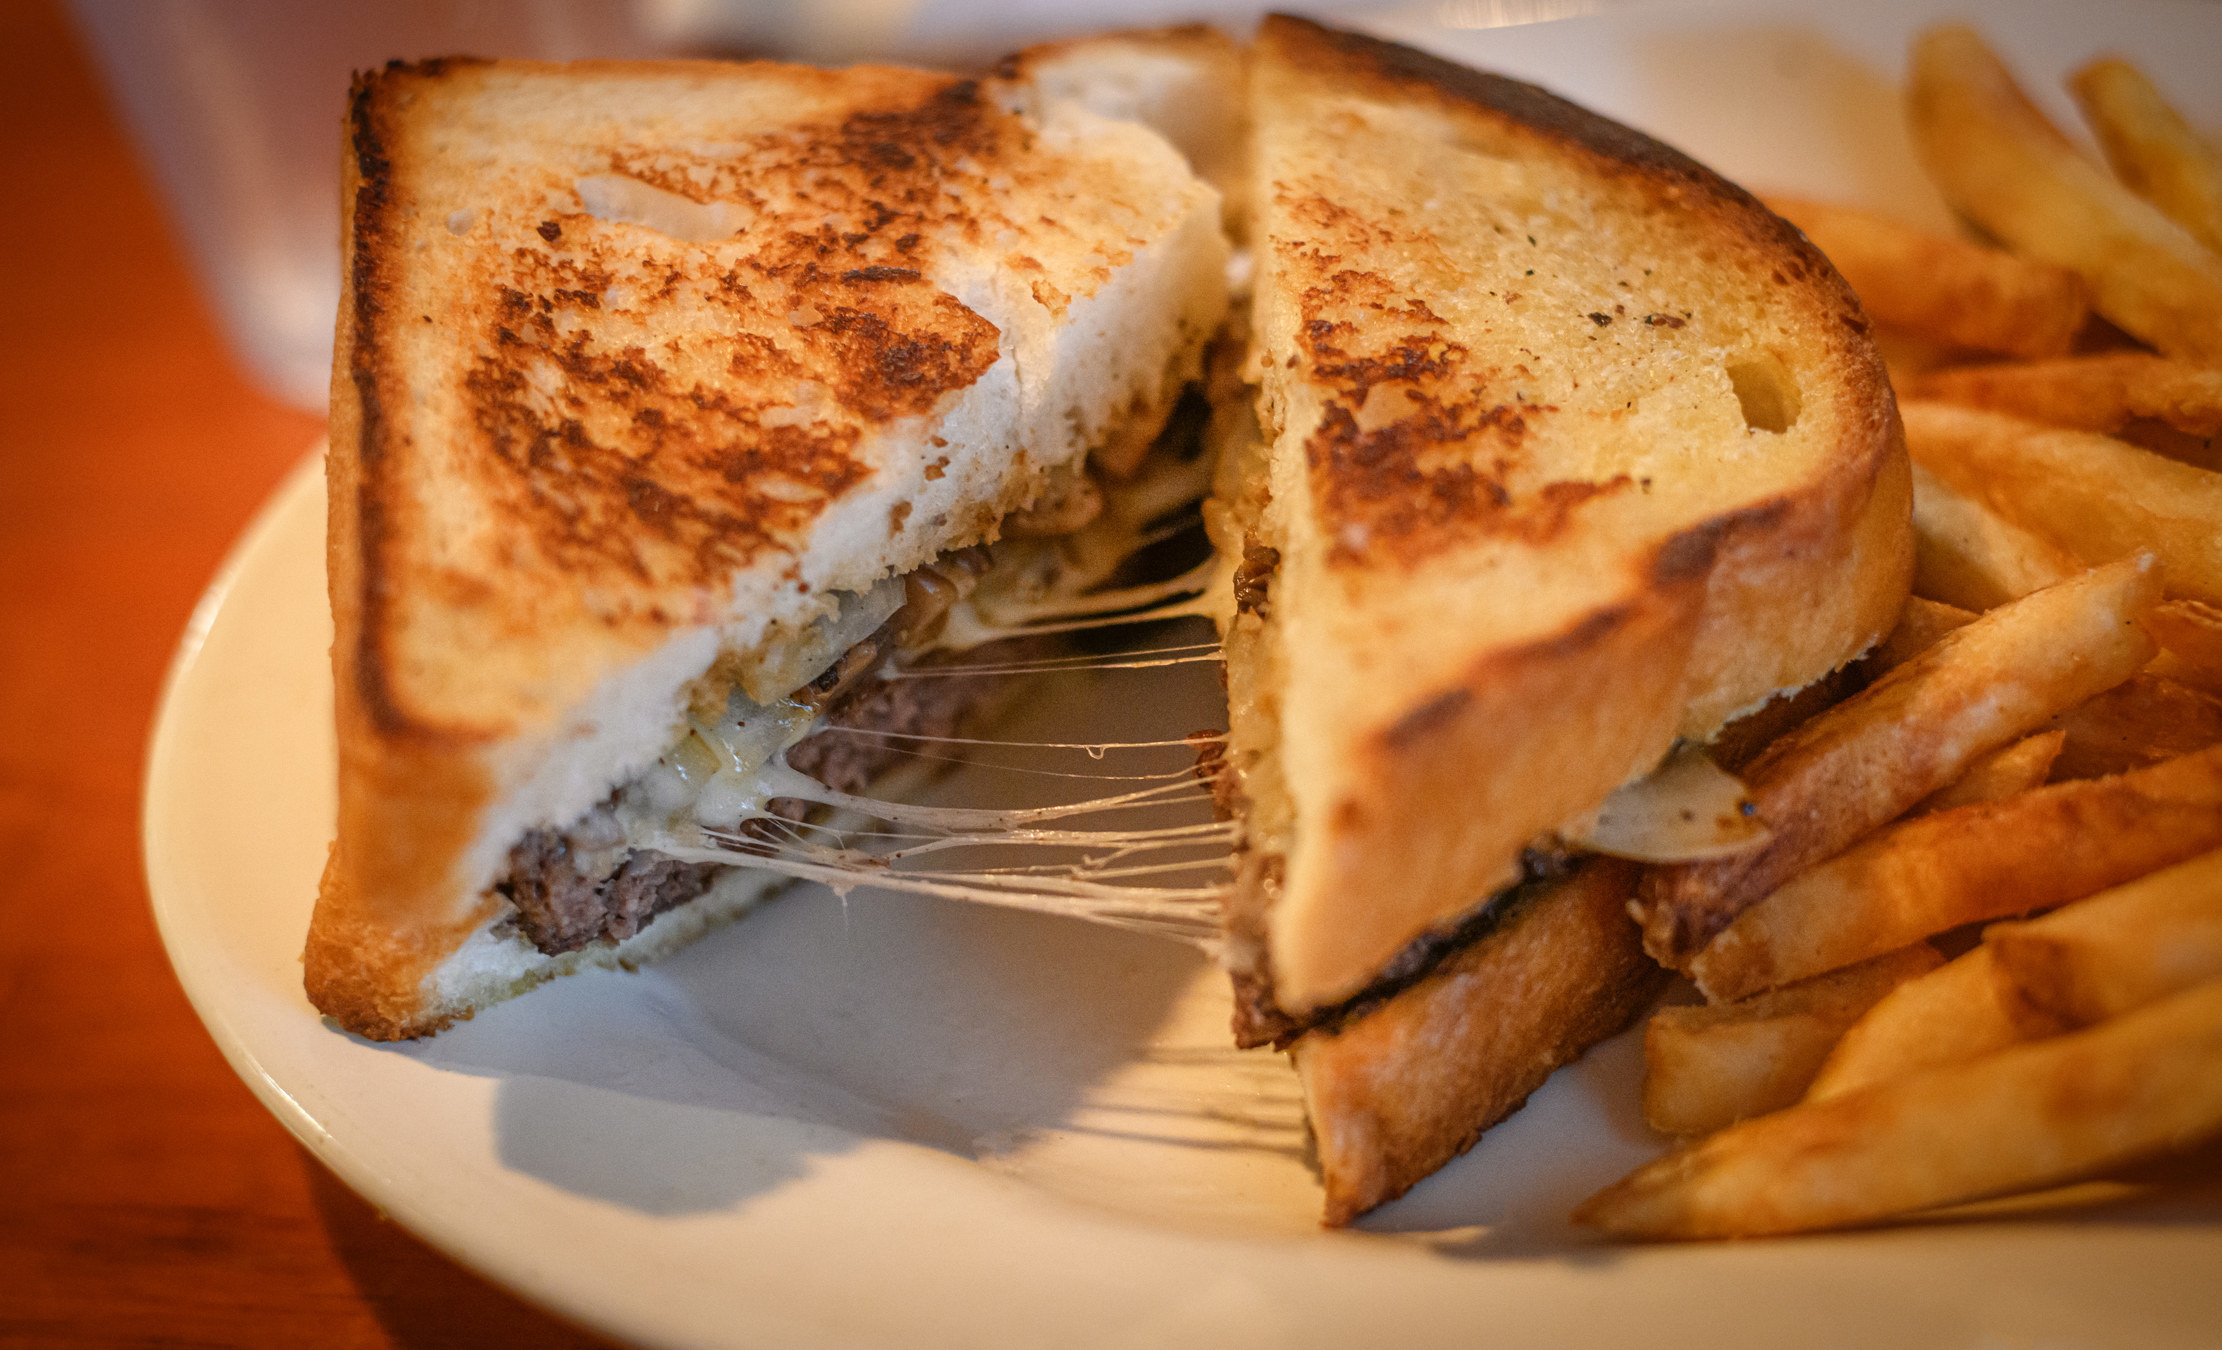 A cheesy patty melt with French fries.